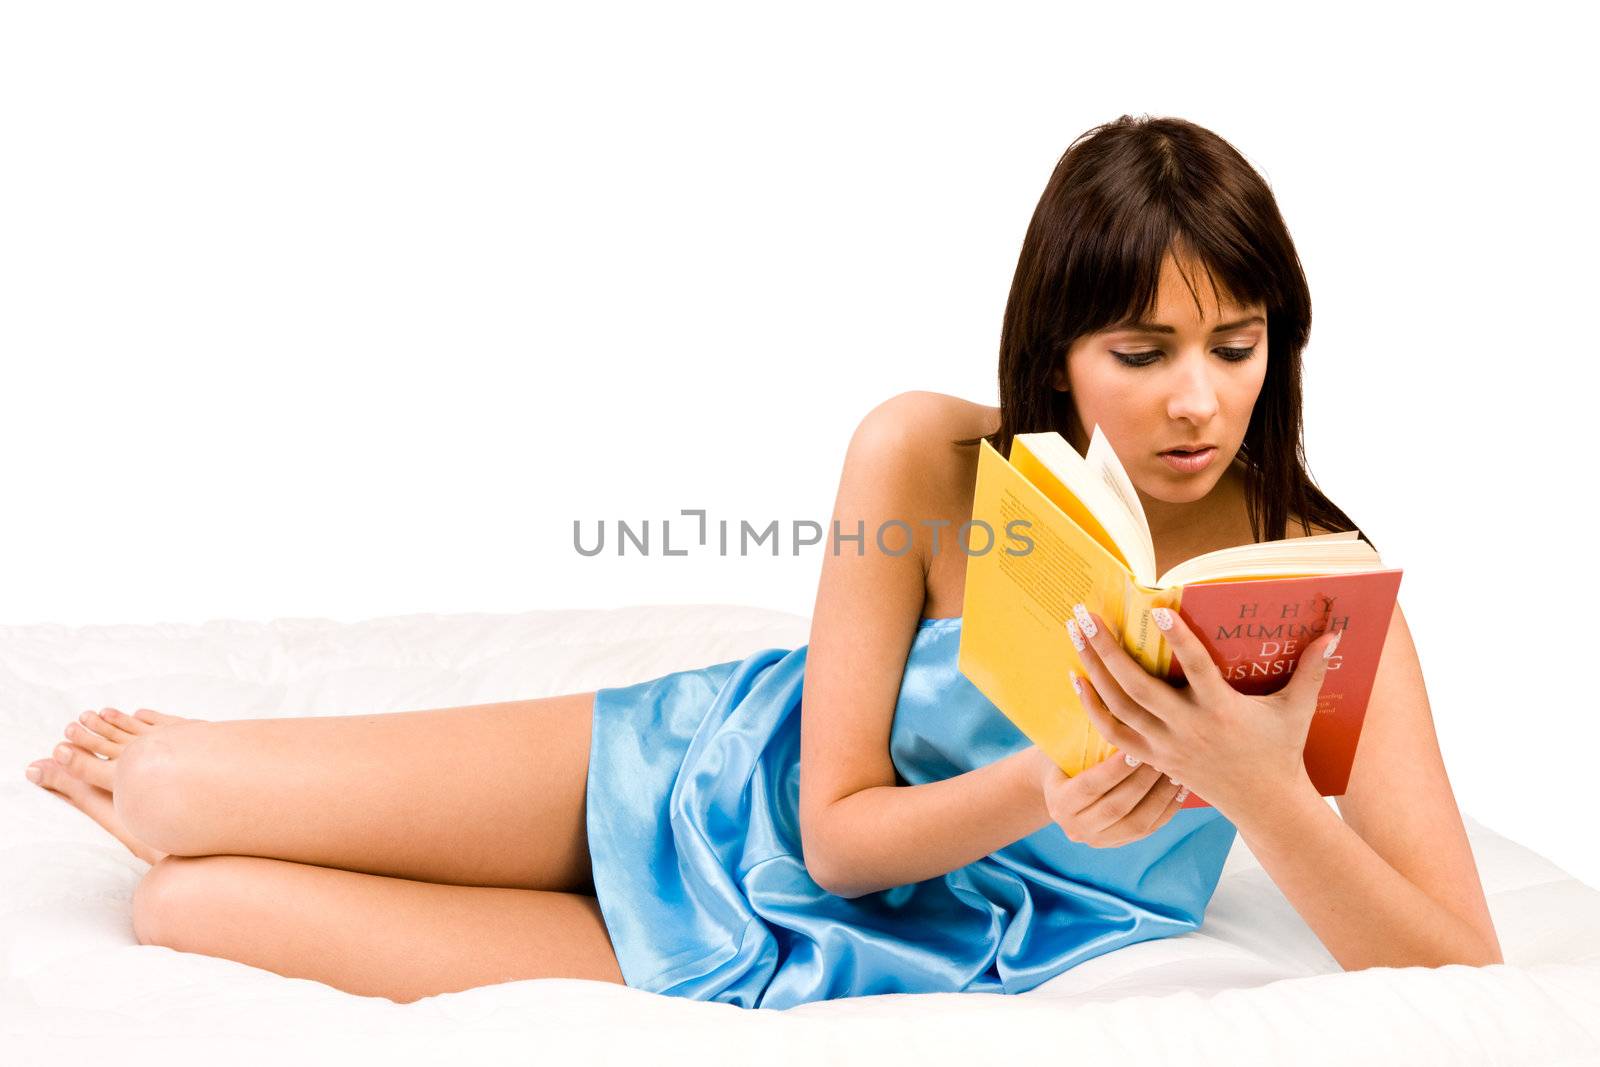 Book and nightgown by DNFStyle